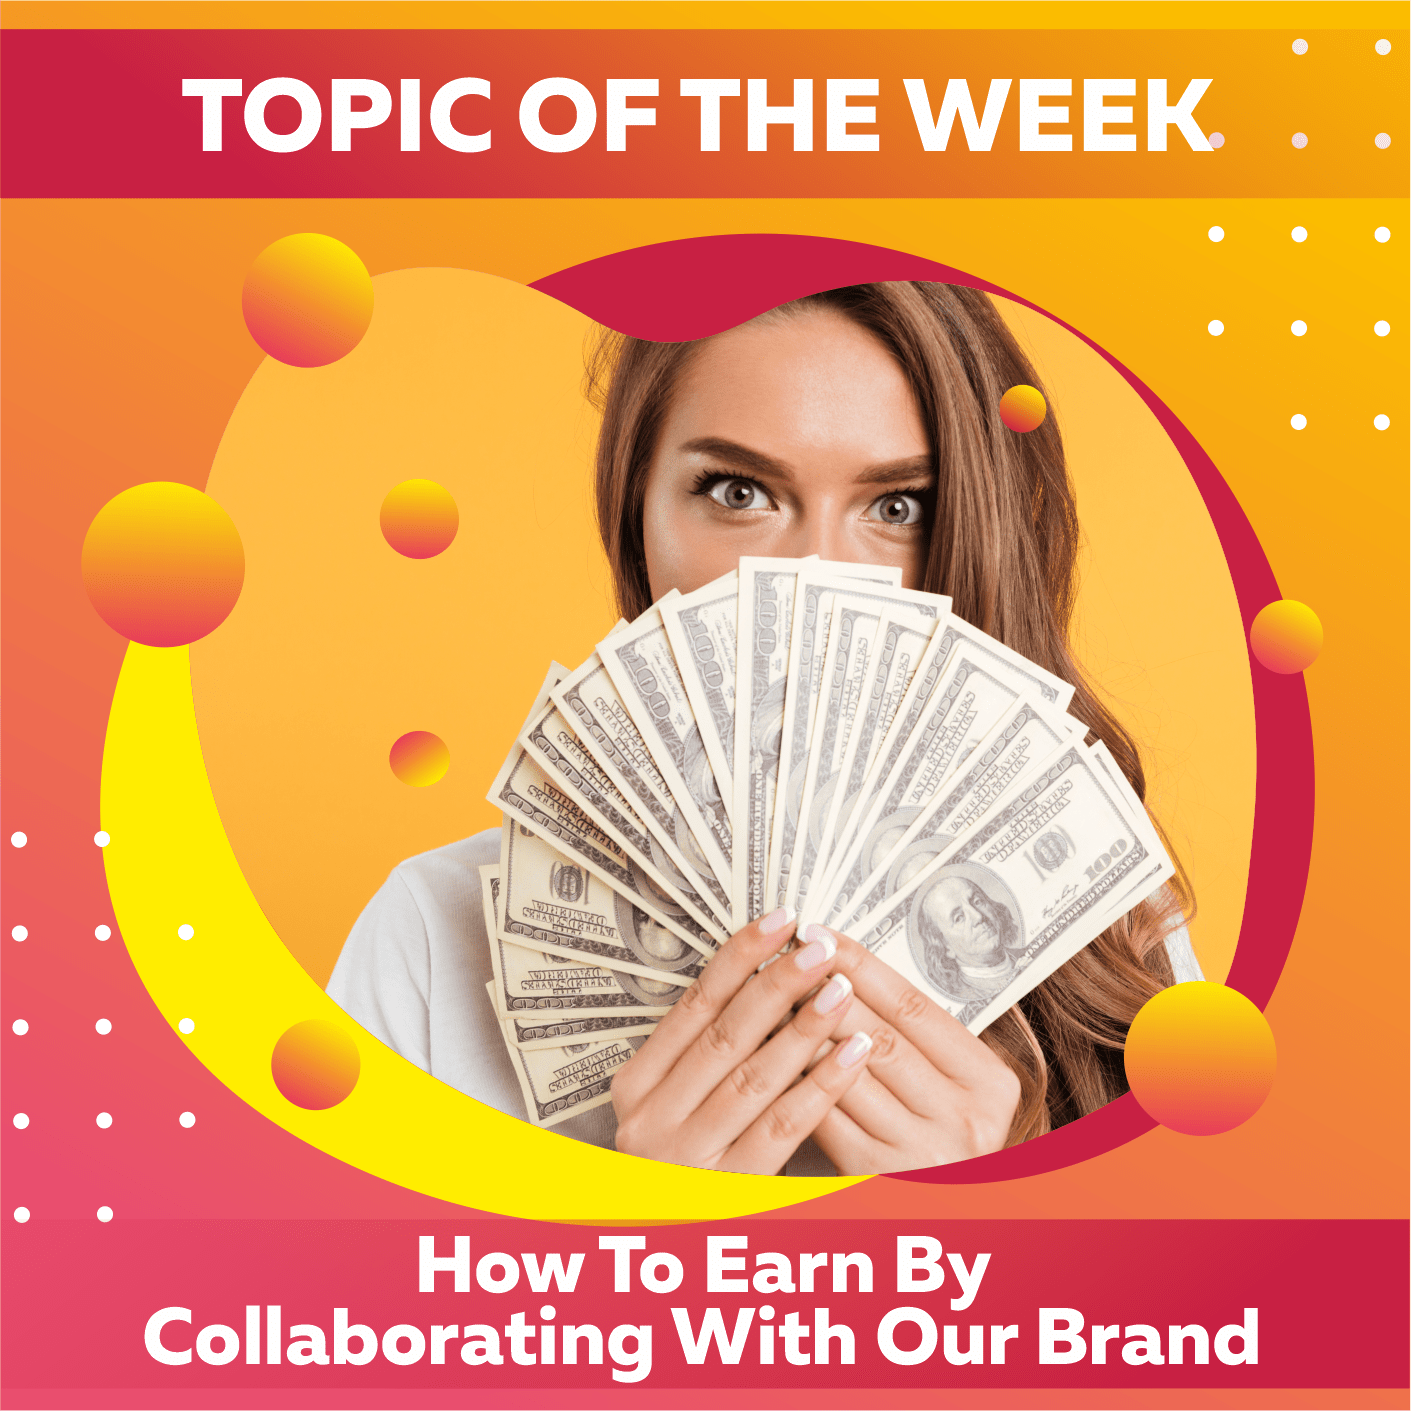 How To Earn By Collaborating With Our Brand